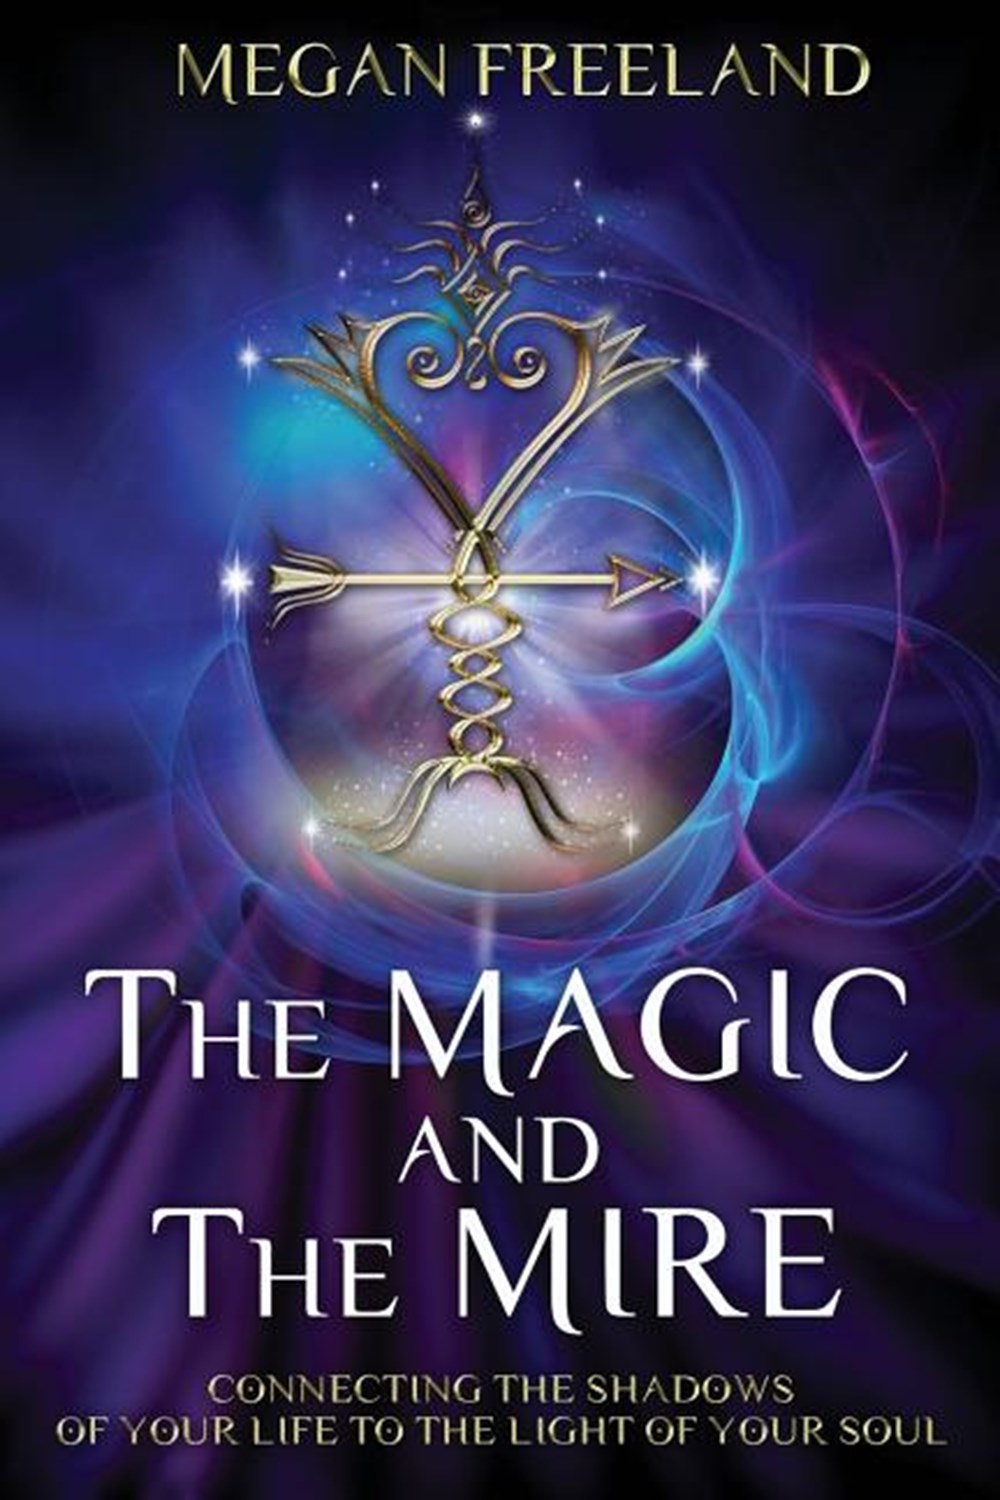 Magic and The Mire: Connecting The Shadows of Your Life to the Light of Your Soul